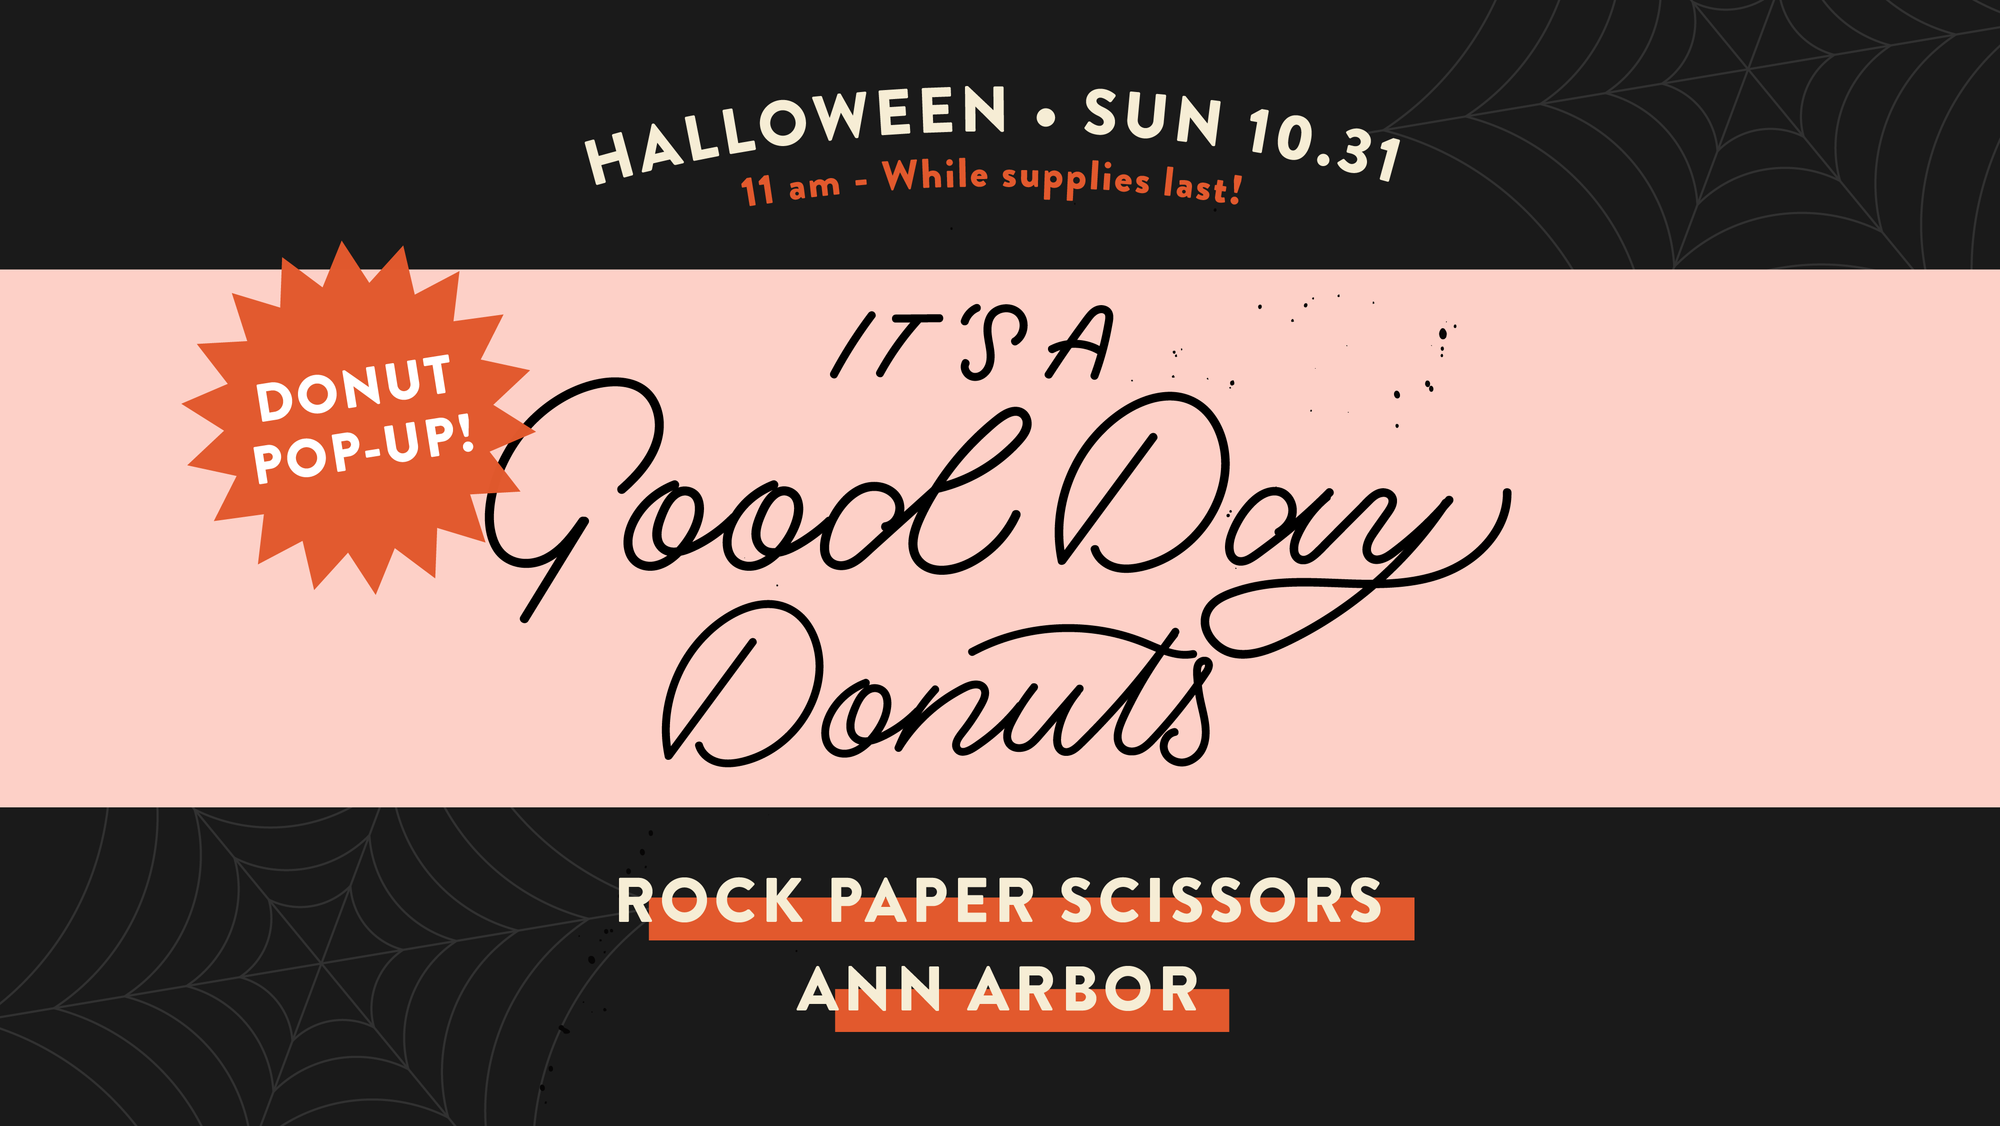 It's a Good Day Donut Pop-Up